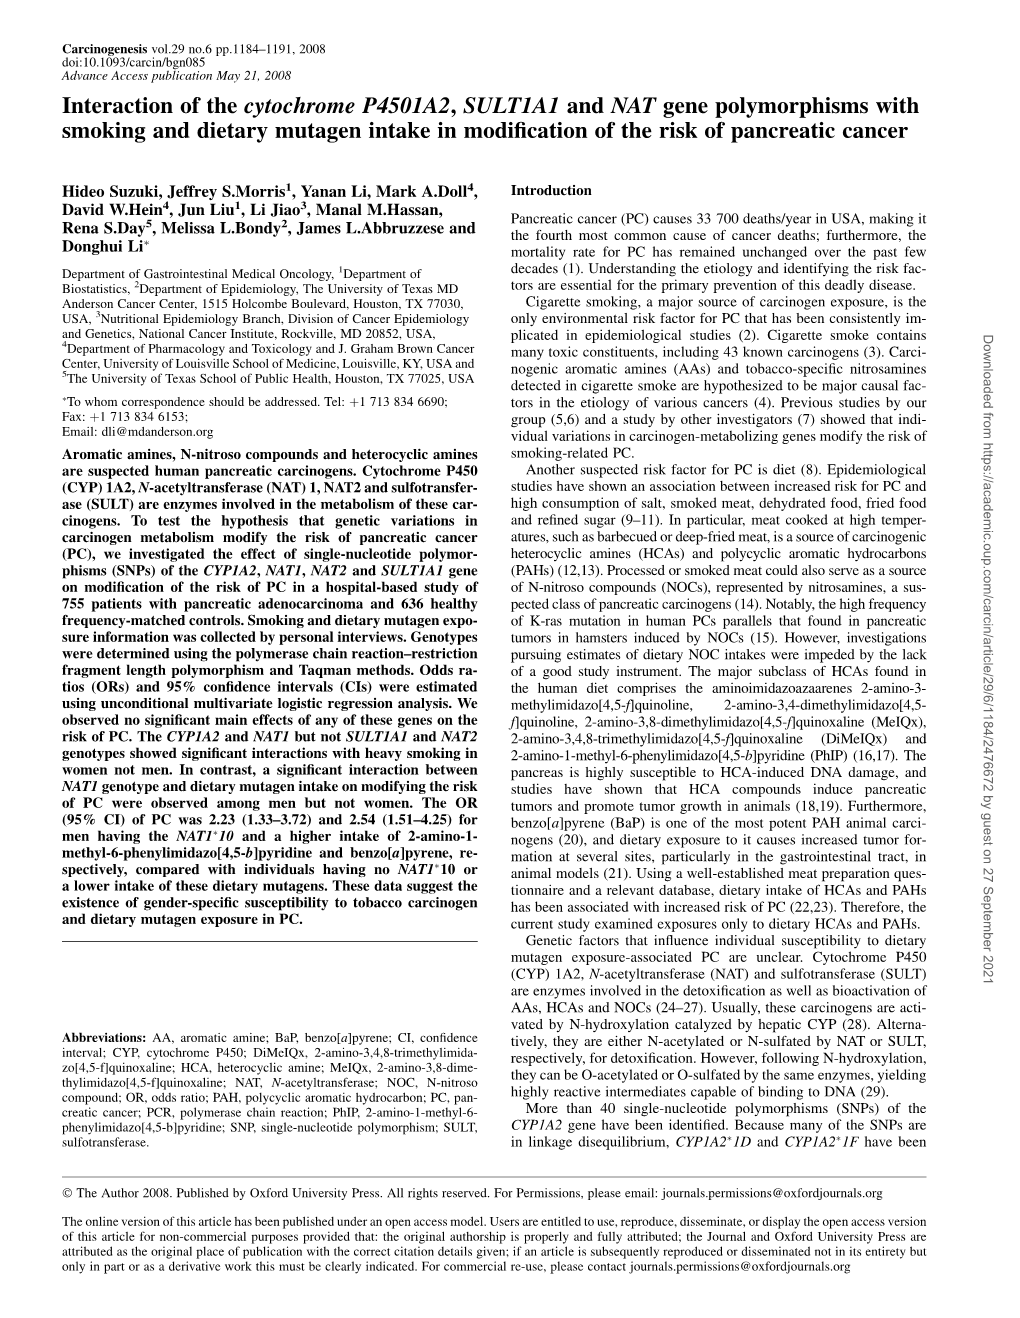 Interaction of the Cytochrome P4501A2, SULT1A1 and NAT Gene Polymorphisms with Smoking and Dietary Mutagen Intake in Modiﬁcation of the Risk of Pancreatic Cancer